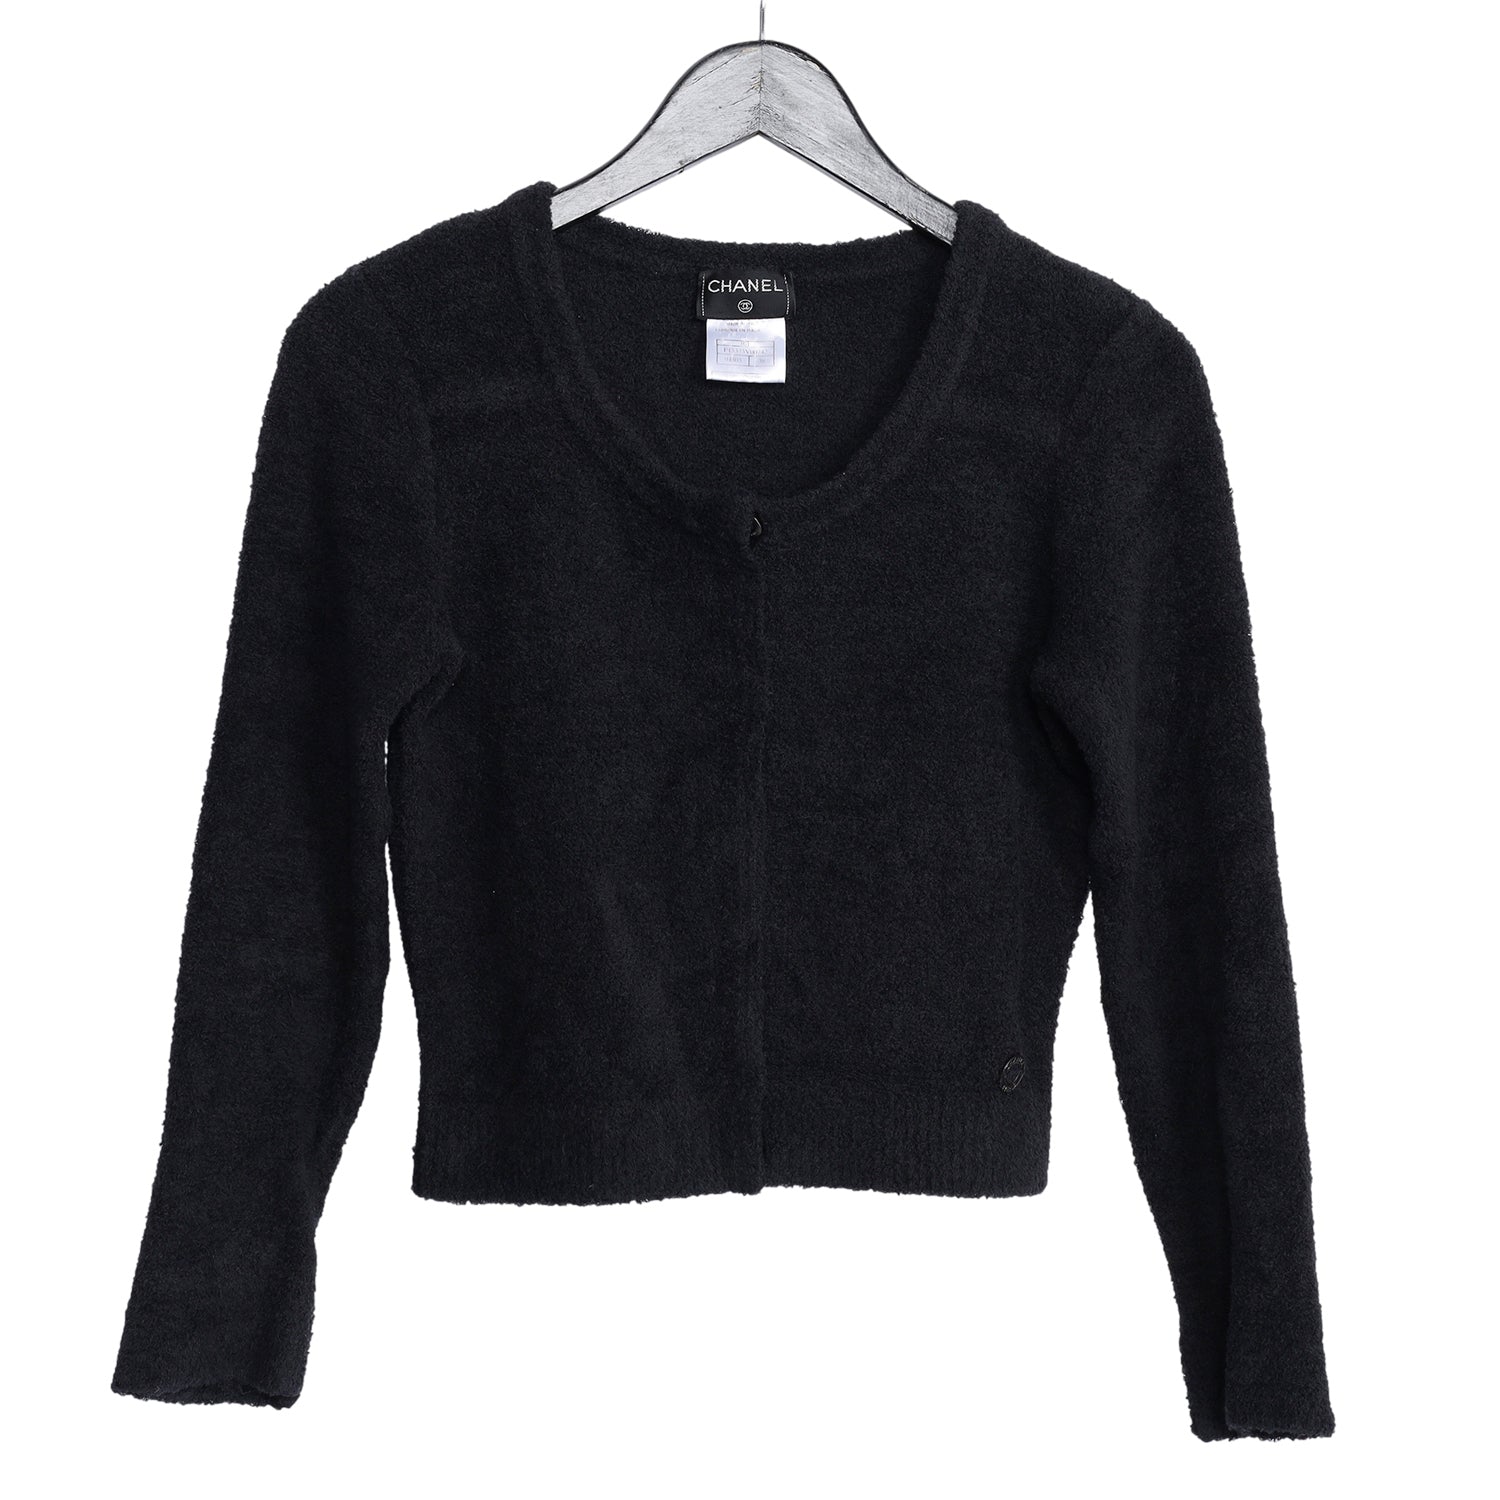 Chanel Black Sweater Cardigan Size 38 (Authentic, Pre-Owned)